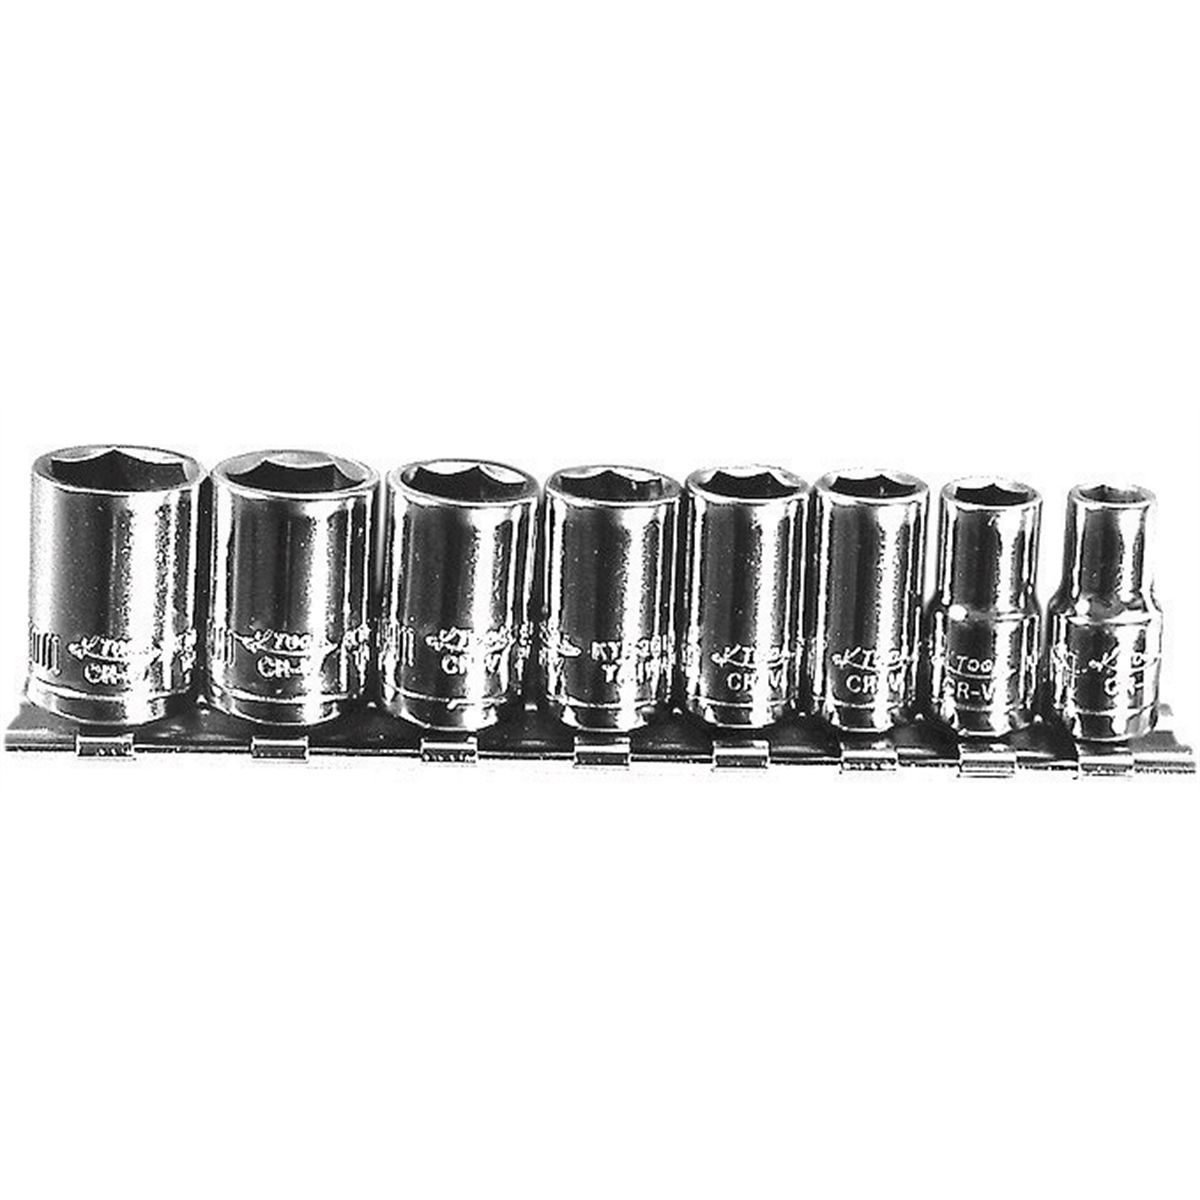 Metric Shallow Socket Set - 1/4 In Drive - 8 Piece